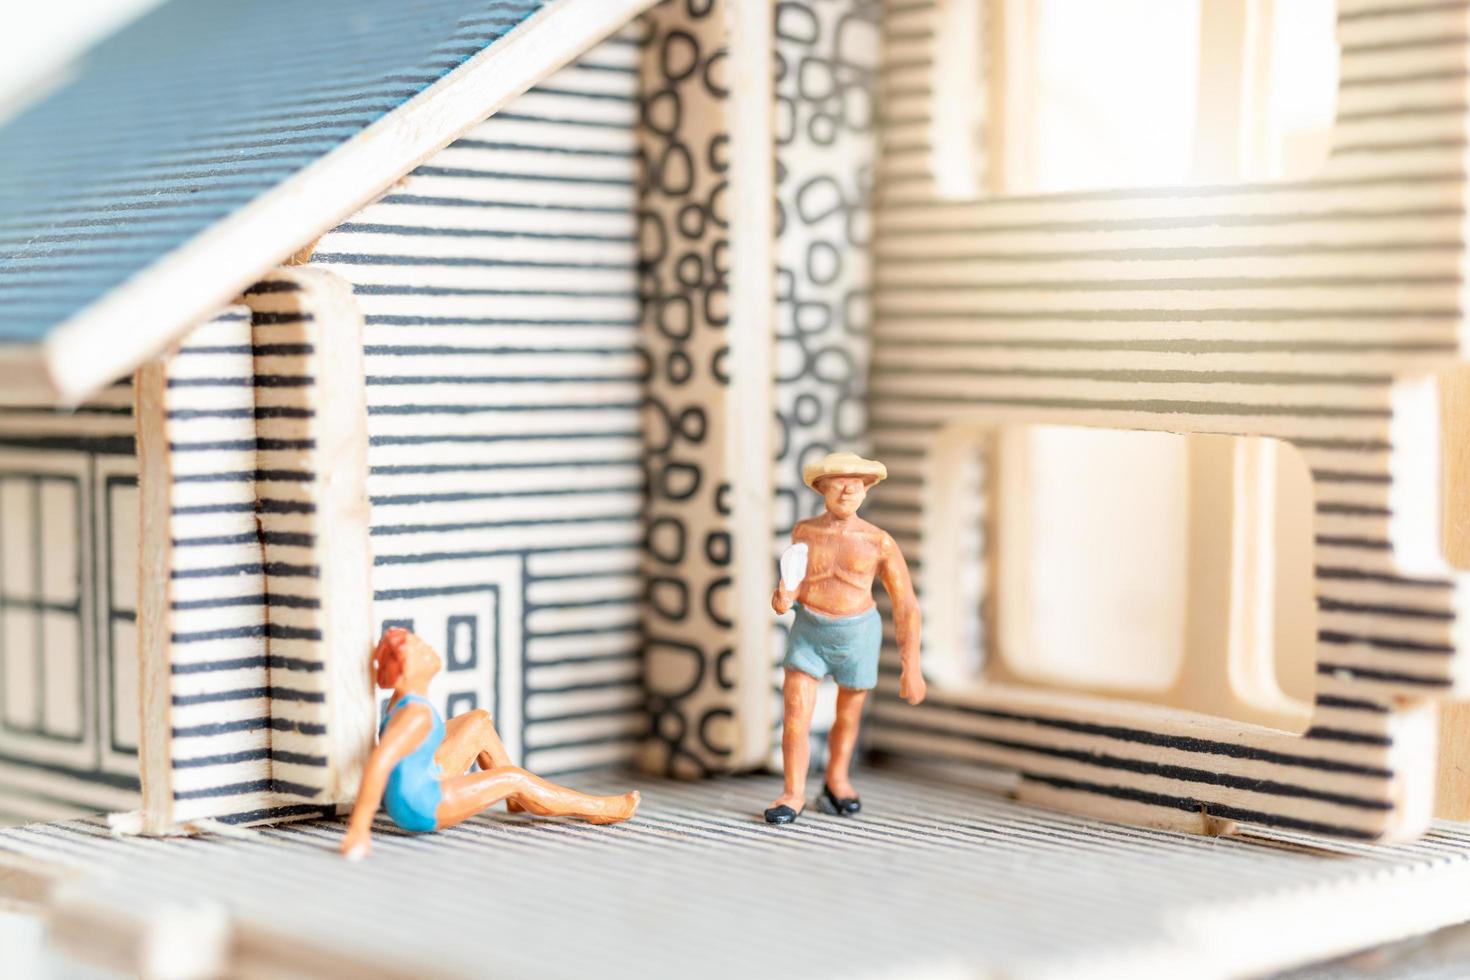 Miniature people staying at home doing self-quarantine to avoid coronavirus, stay home concept photo